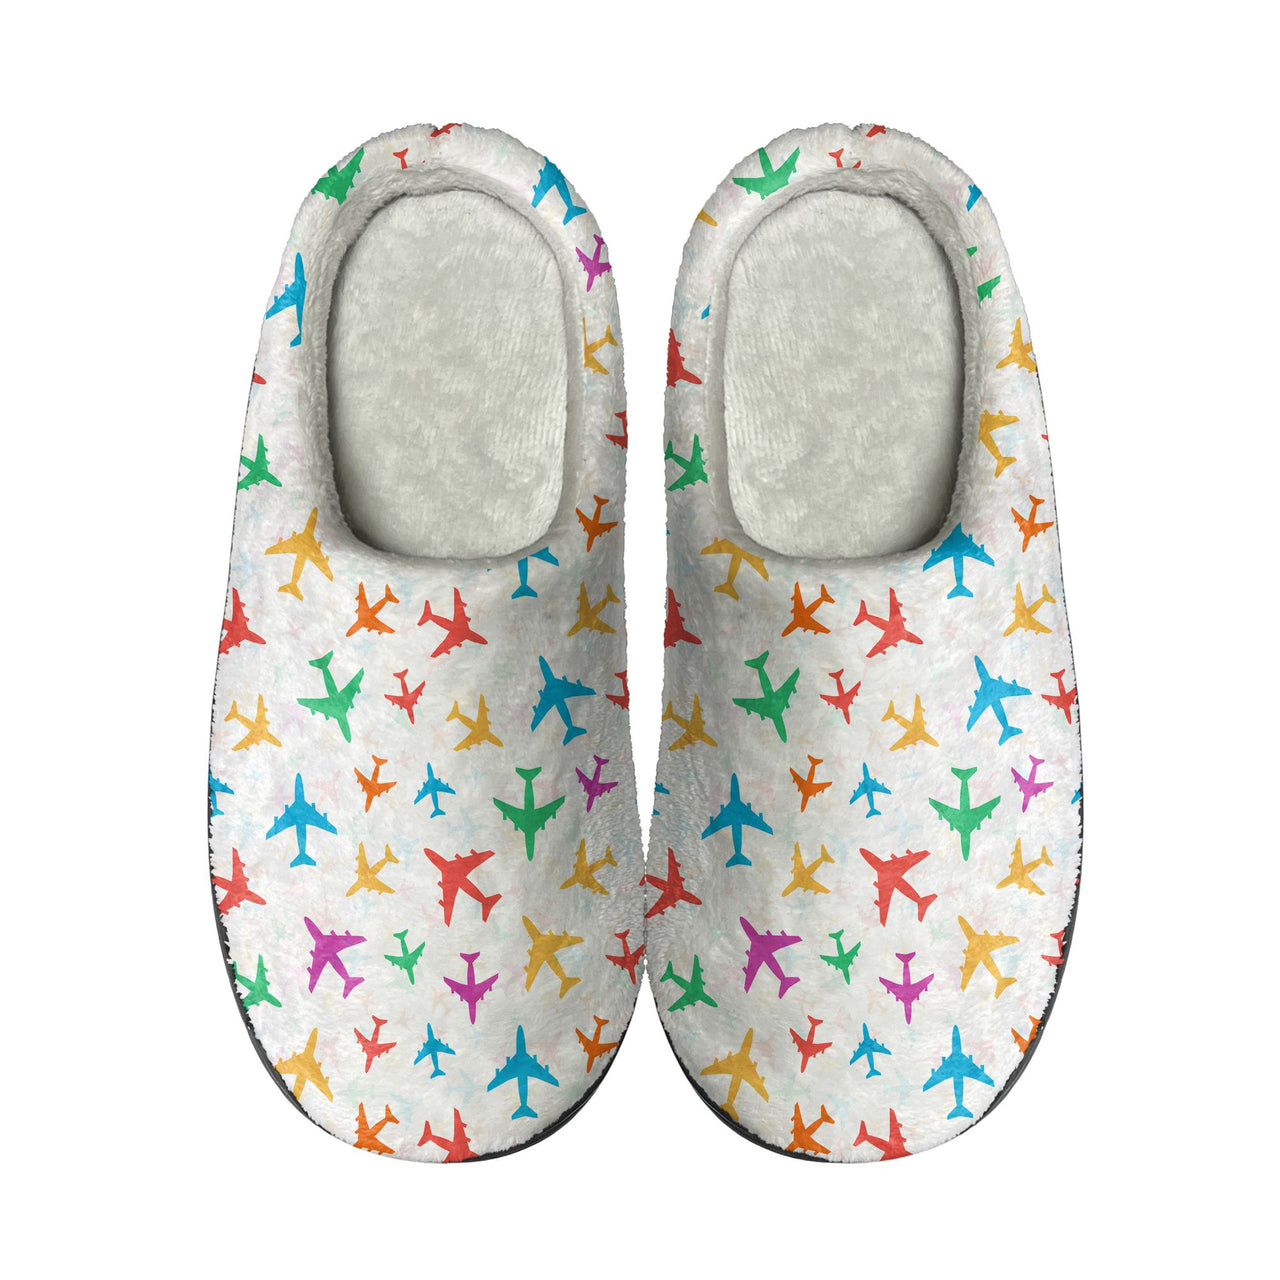 Cheerful Seamless Airplanes Designed Cotton Slippers